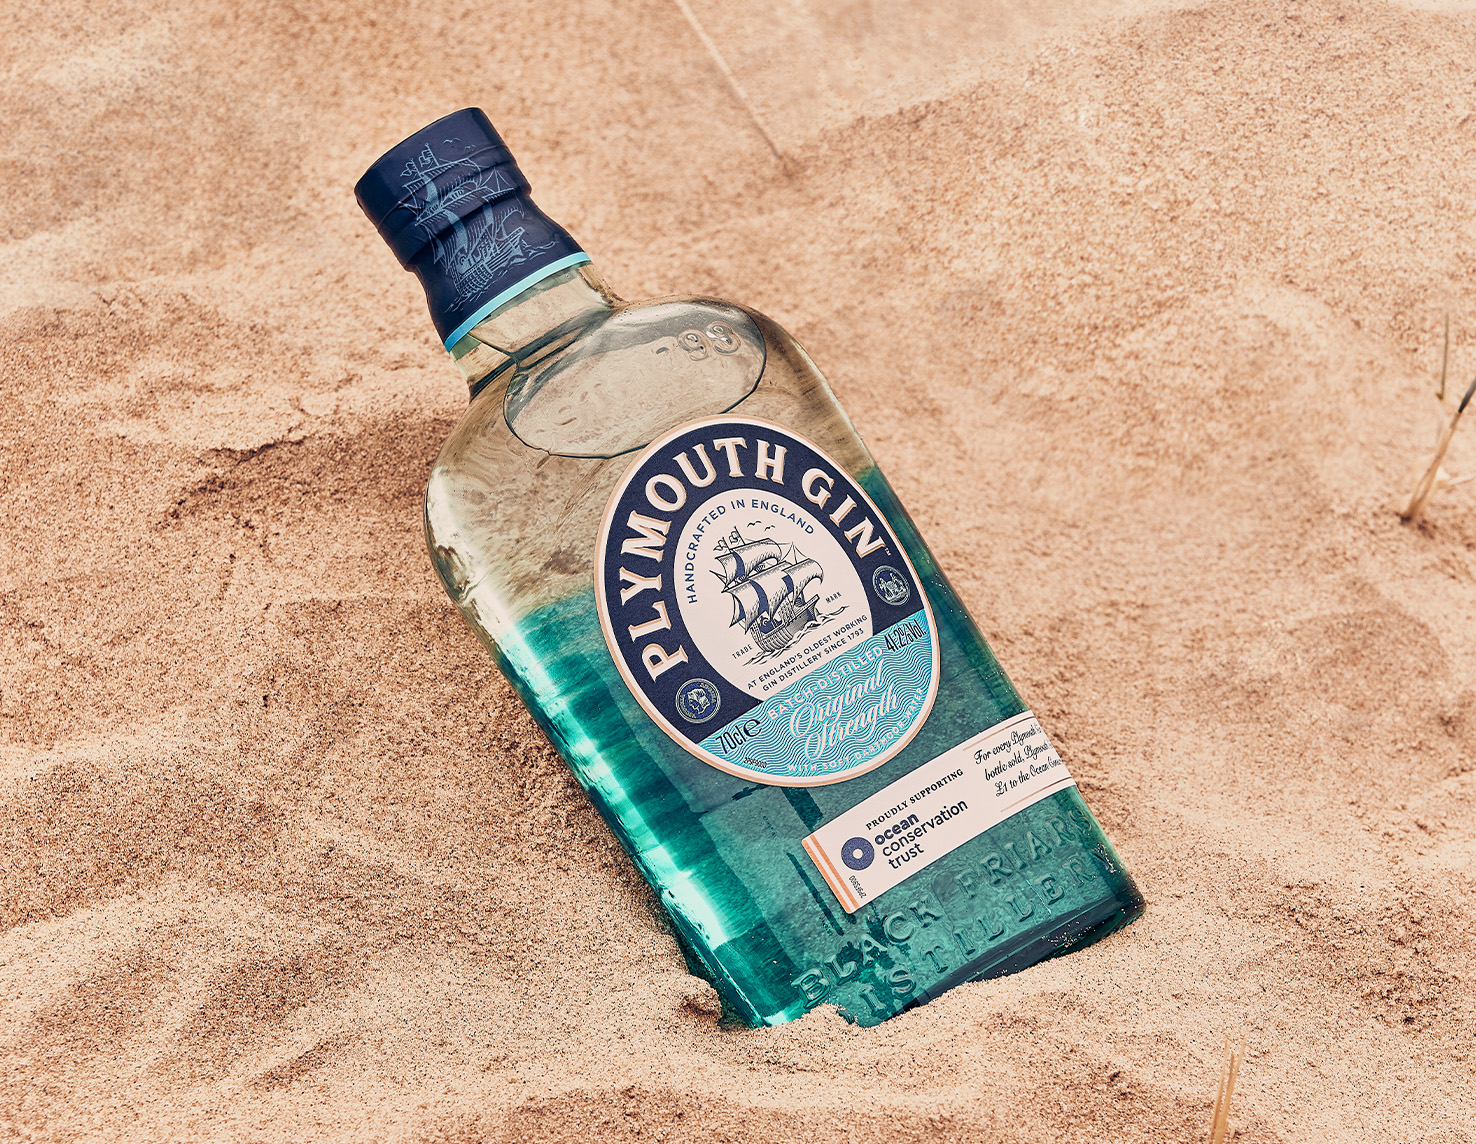 Plymouth Gin Ocean Edition in sand on the beach